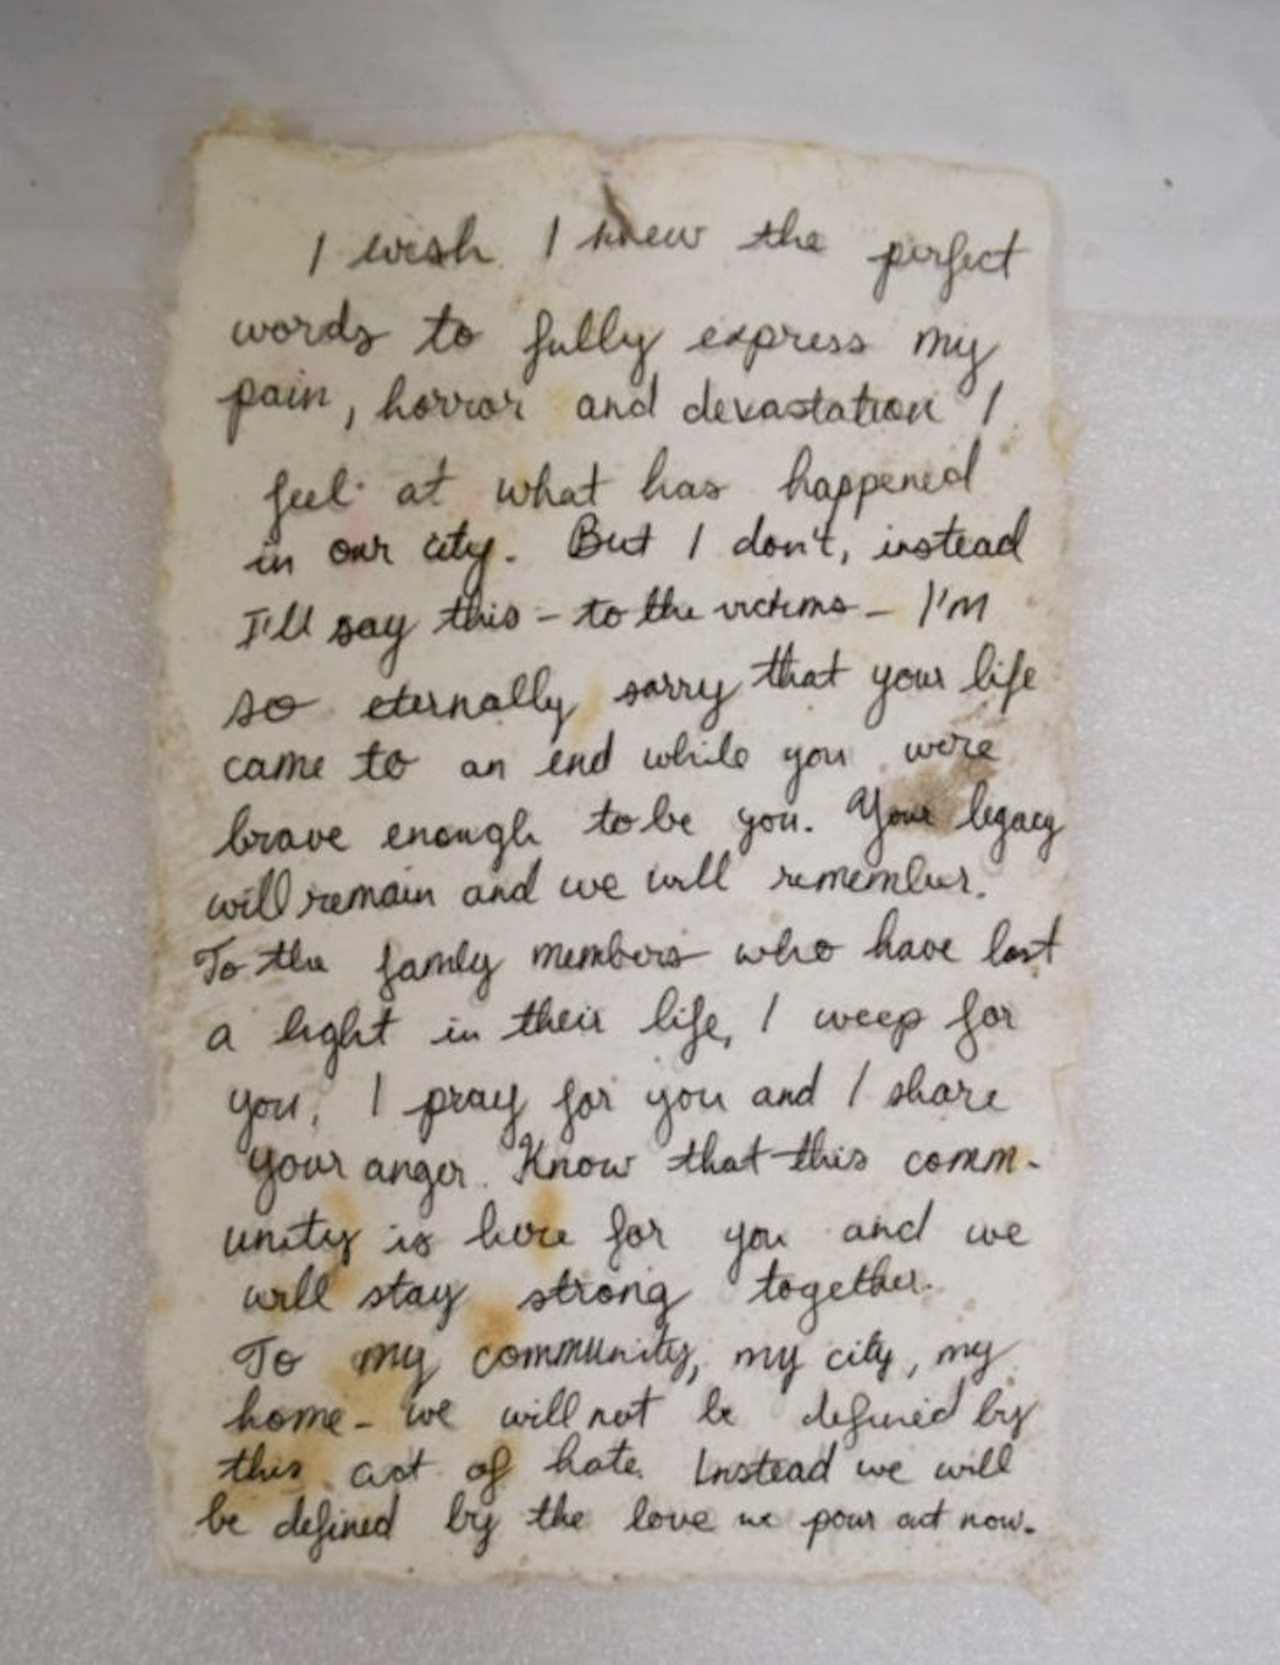 Handwritten Letter 
Description: 
Handwritten letter on what appears to be homemade paper that says, &#147;I wish I knew the perfect words to fully express my pain, horror and devastation I feel at what has happened in our city. But I don&#146;t, instead I&#146;ll say this- to the victims &#150; I&#146;m so eternally sorry that your life came to an end while you were brave enough to be you. Your legacy will remain and we will remember. To the family members who have lost a light in their life, I weep for you, I pray for you and I share your anger. Know that this community is here for you and we will stay strong together. To my community, my city, my home &#150; we will not be defined by this act of hate. Instead we will be defined by the love we pour out now.&#148; Written on the reverse side, &#147;Love is Love is Love is Love/ #orlandostrong.&#148;